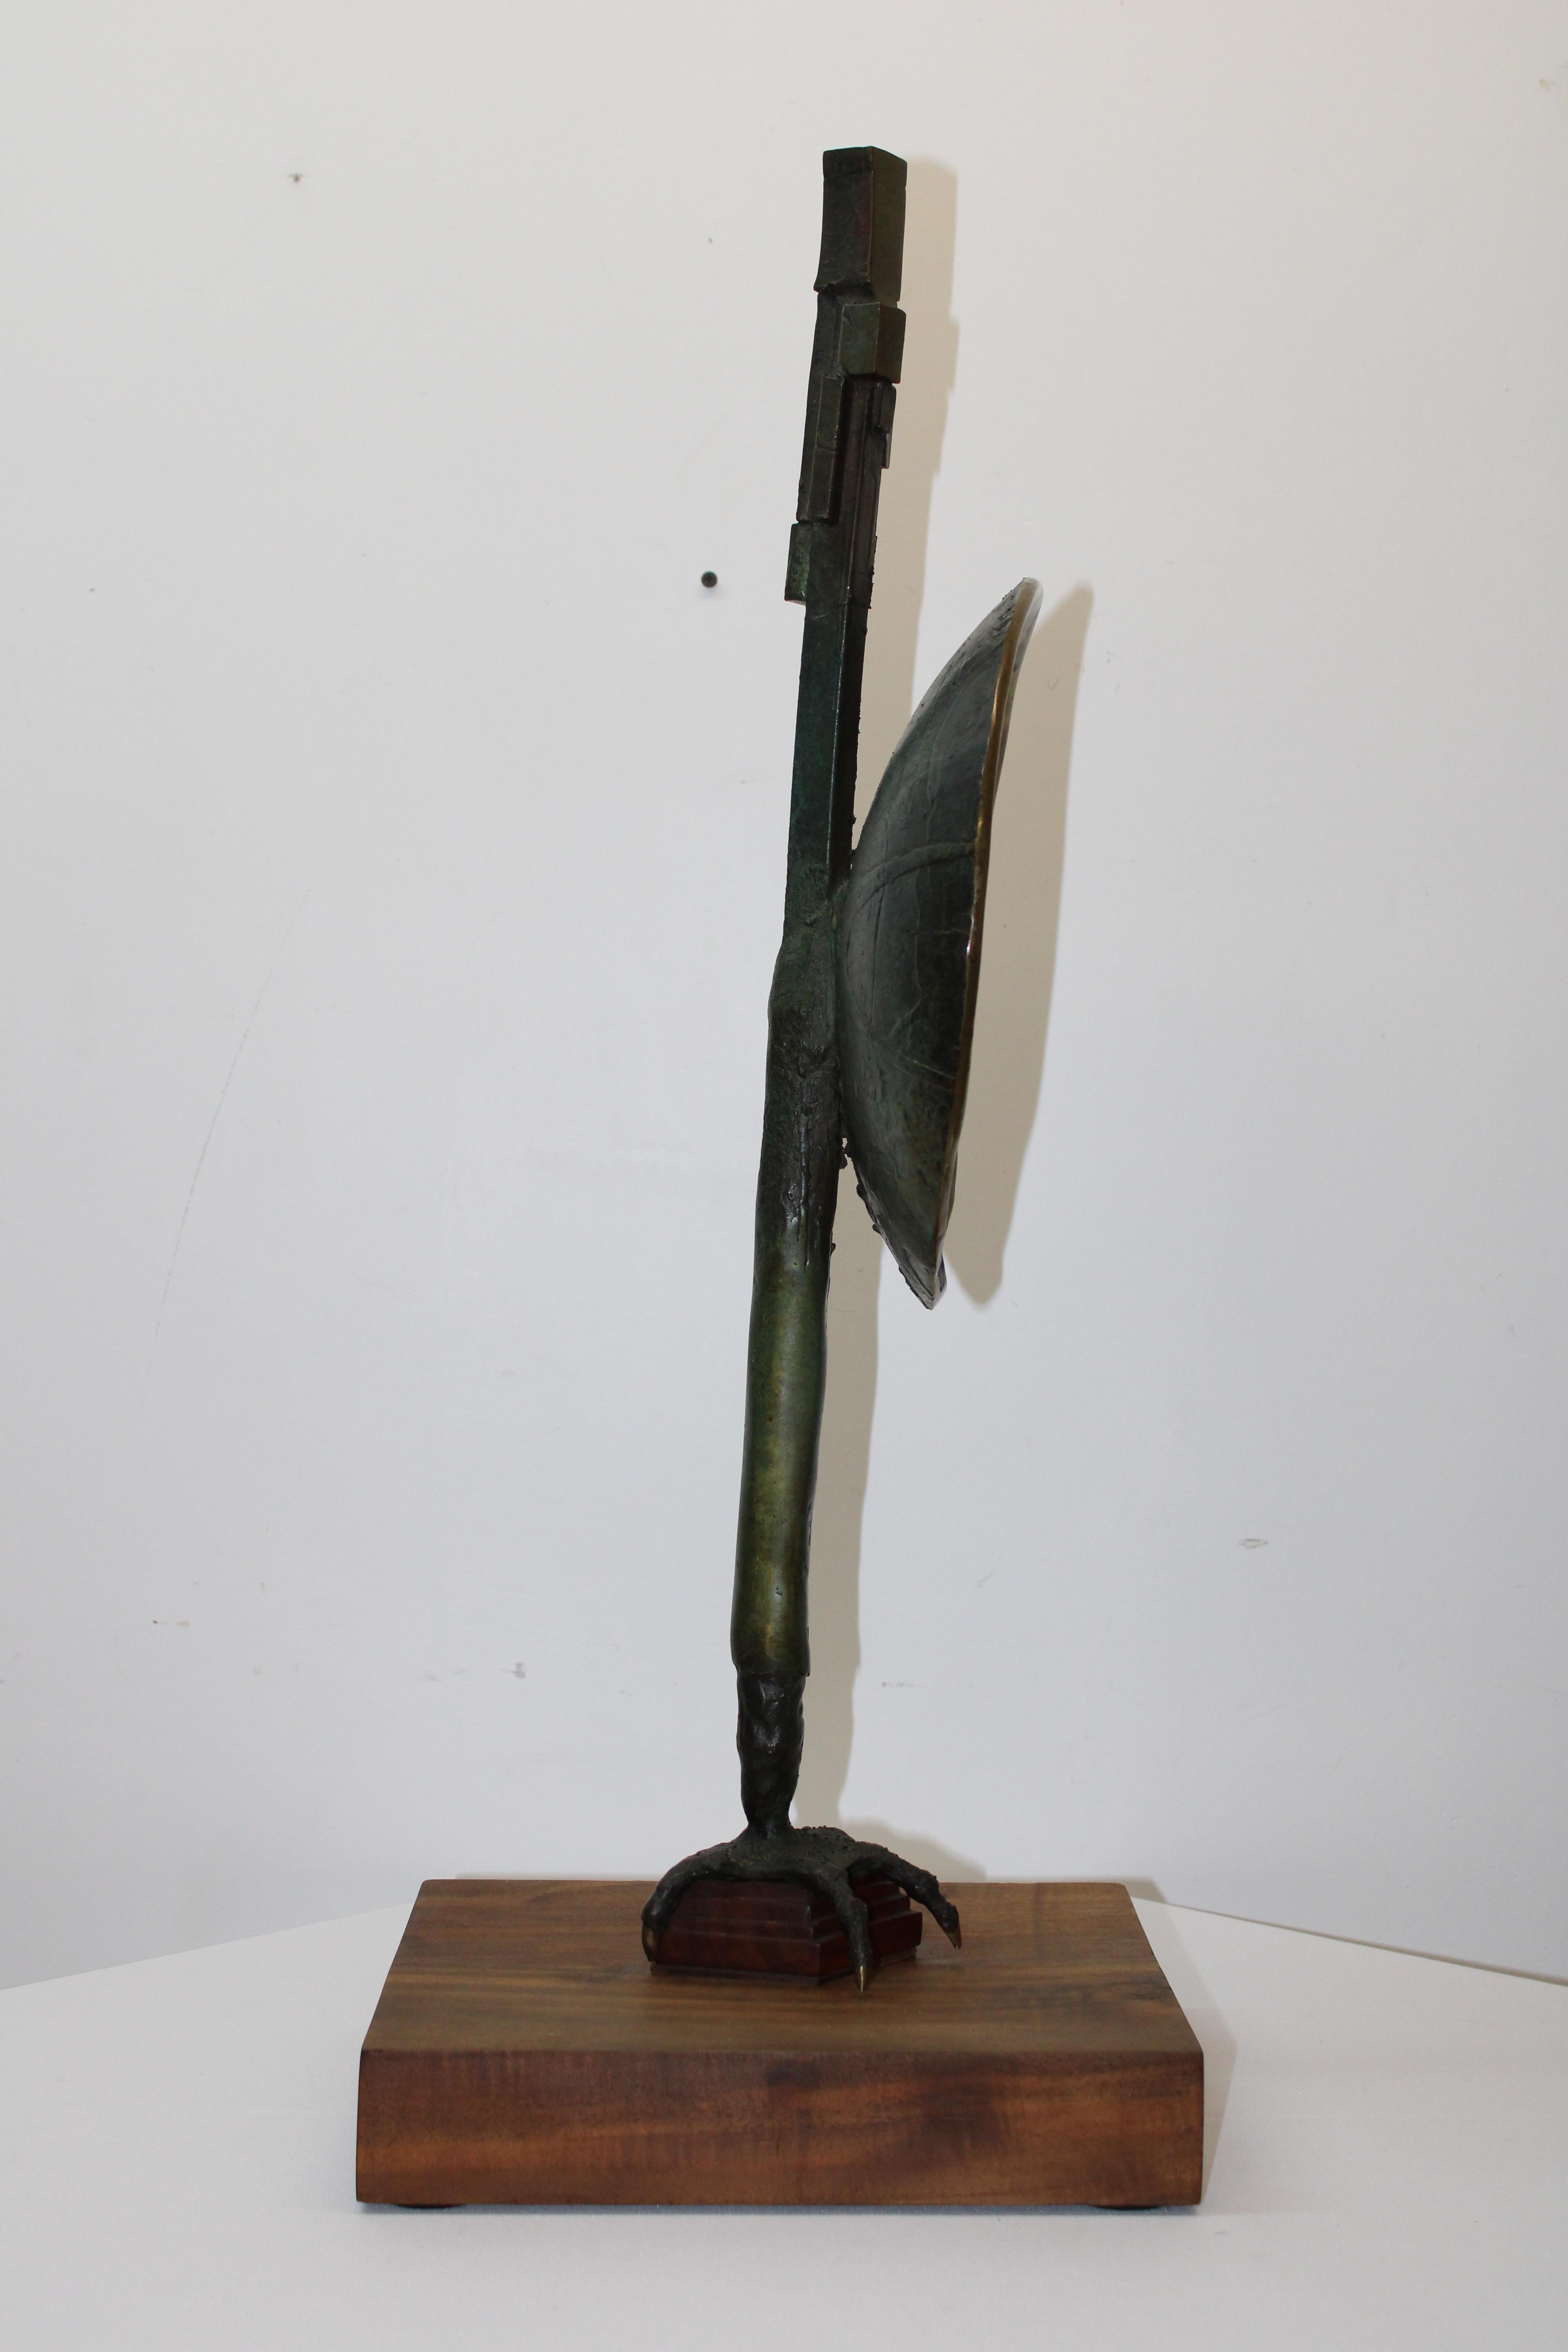 20th Century One of a Kind Abstract Sculpture After Picasso on Wood Base For Sale